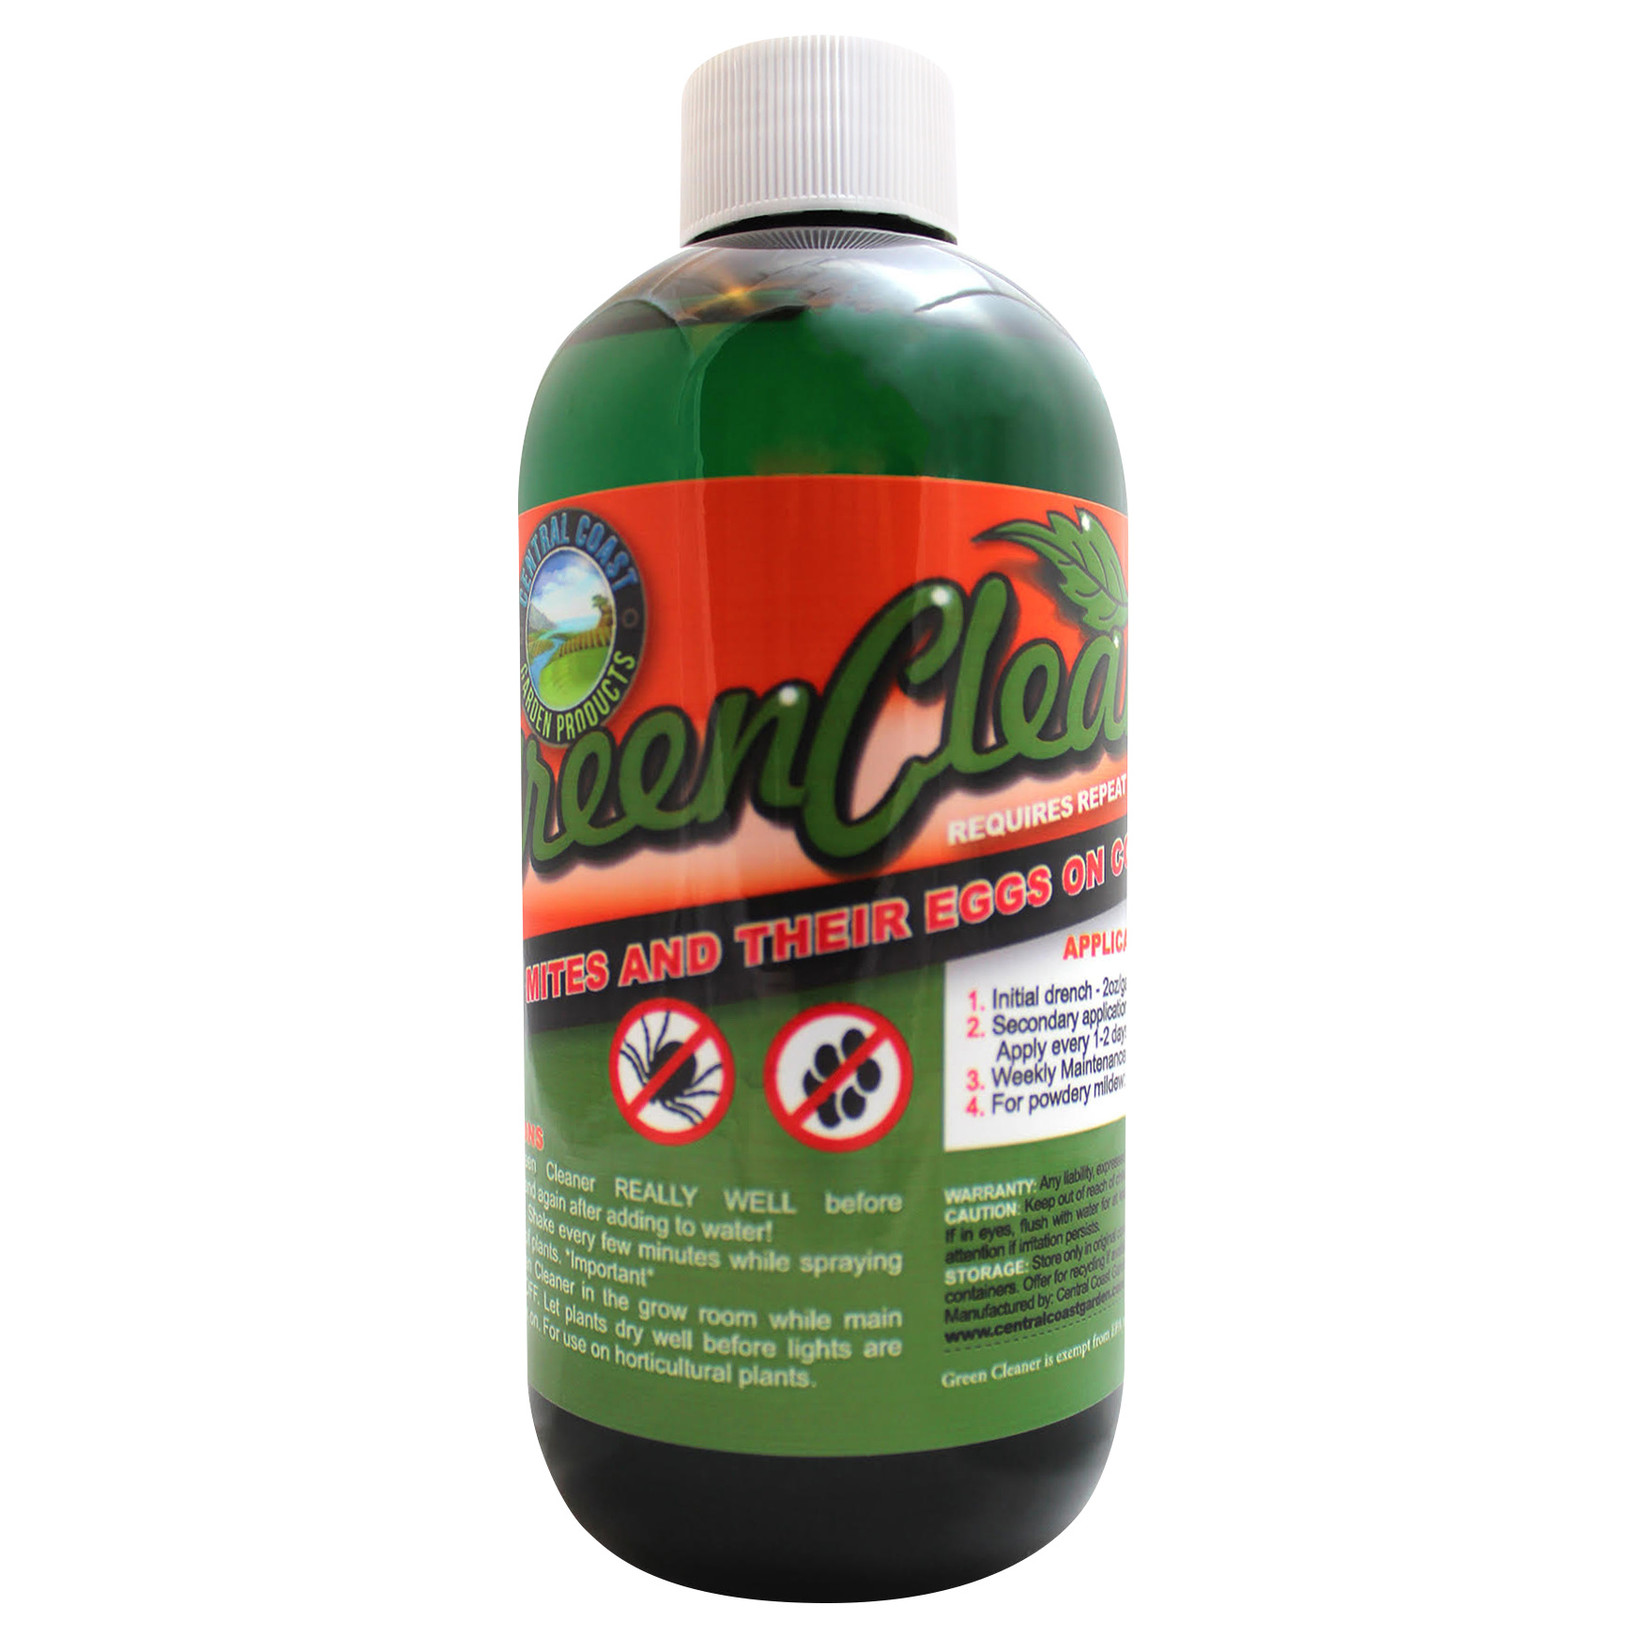 Central Coast Garden Products Green Cleaner 8 oz